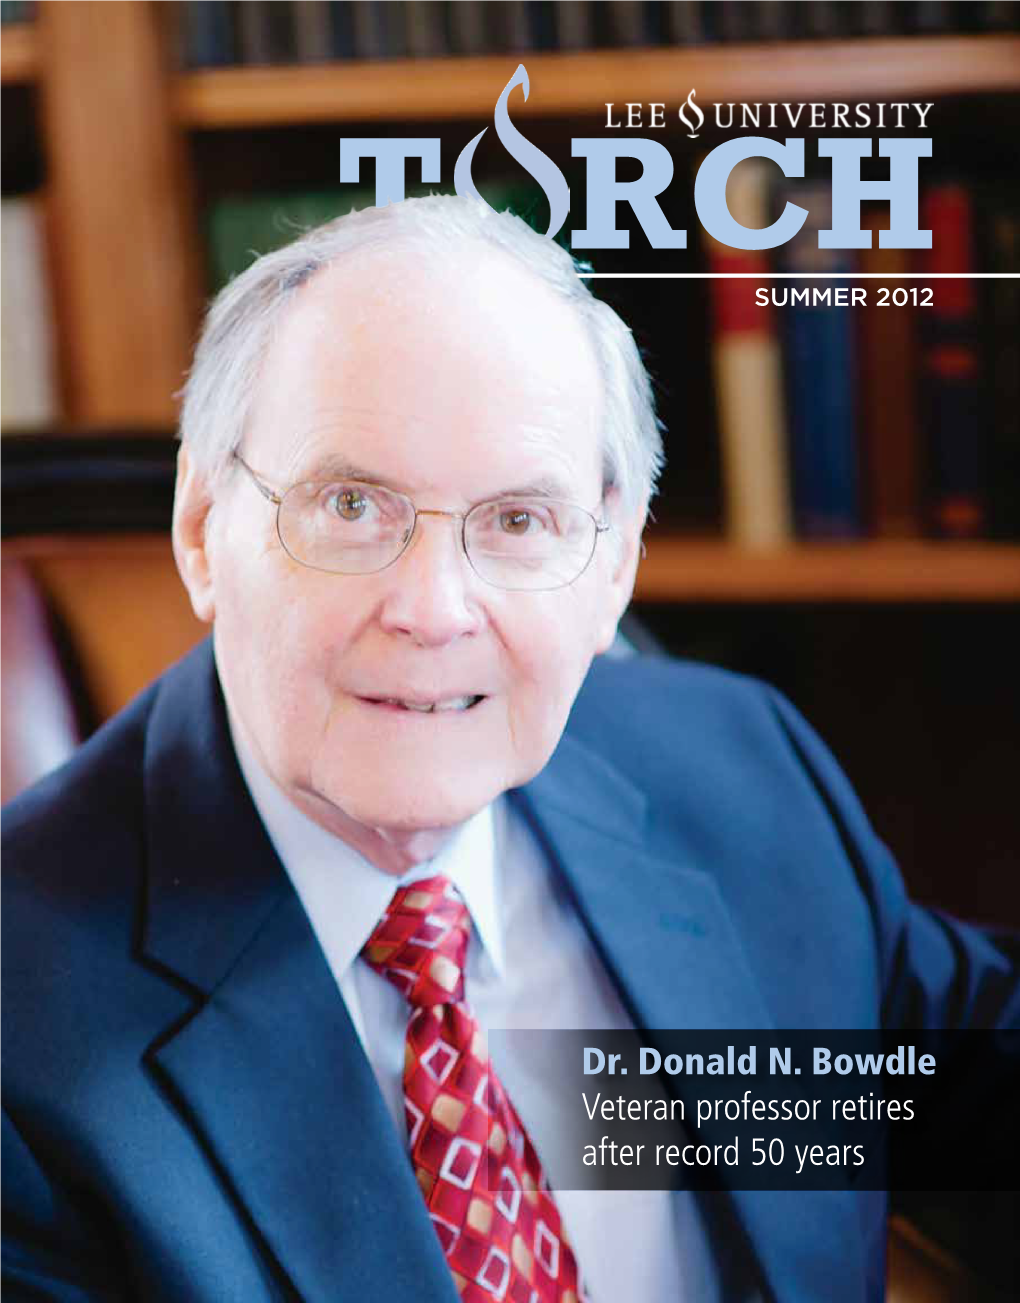 Dr. Donald N. Bowdle Veteran Professor Retires After Record 50 Years Lee University TORCH Summer 2012 - Vol